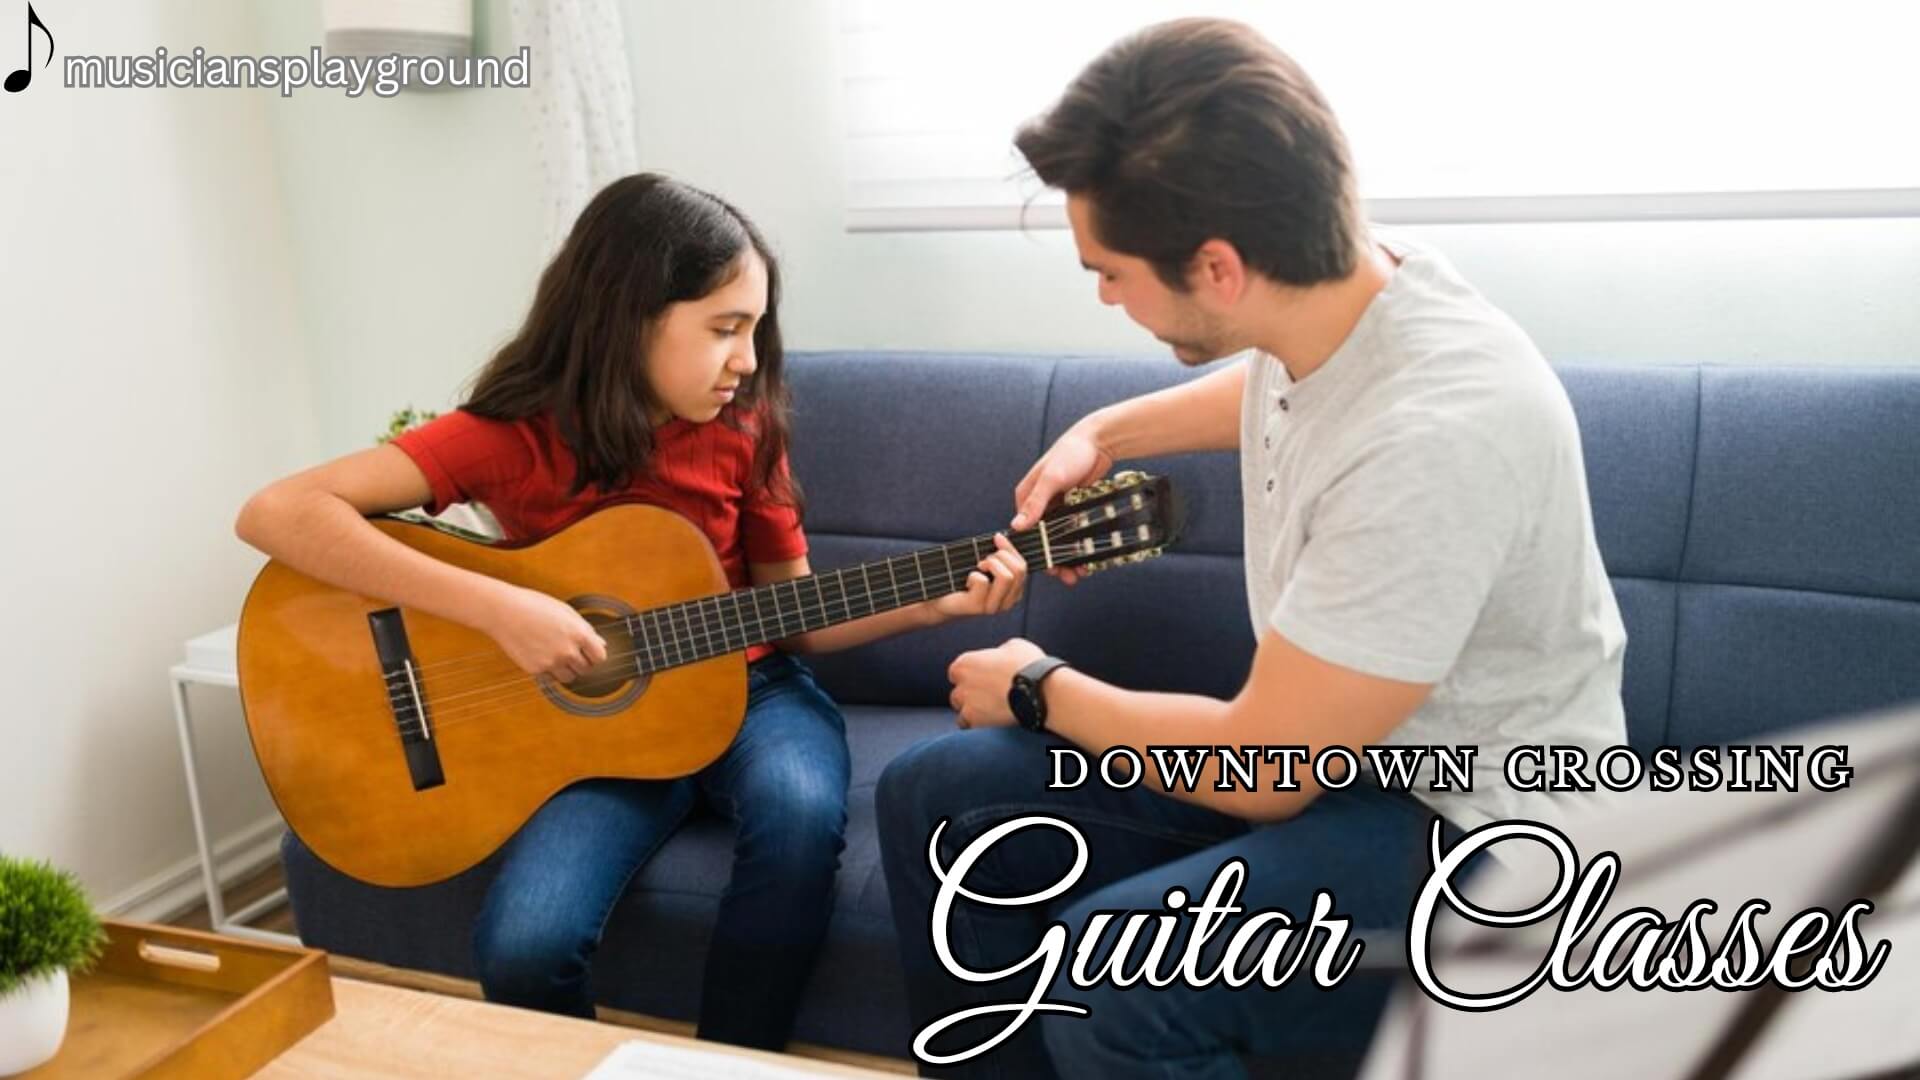 Welcome to Musicians Playground: Your Source for Guitar Classes in Downtown Crossing, Massachusetts